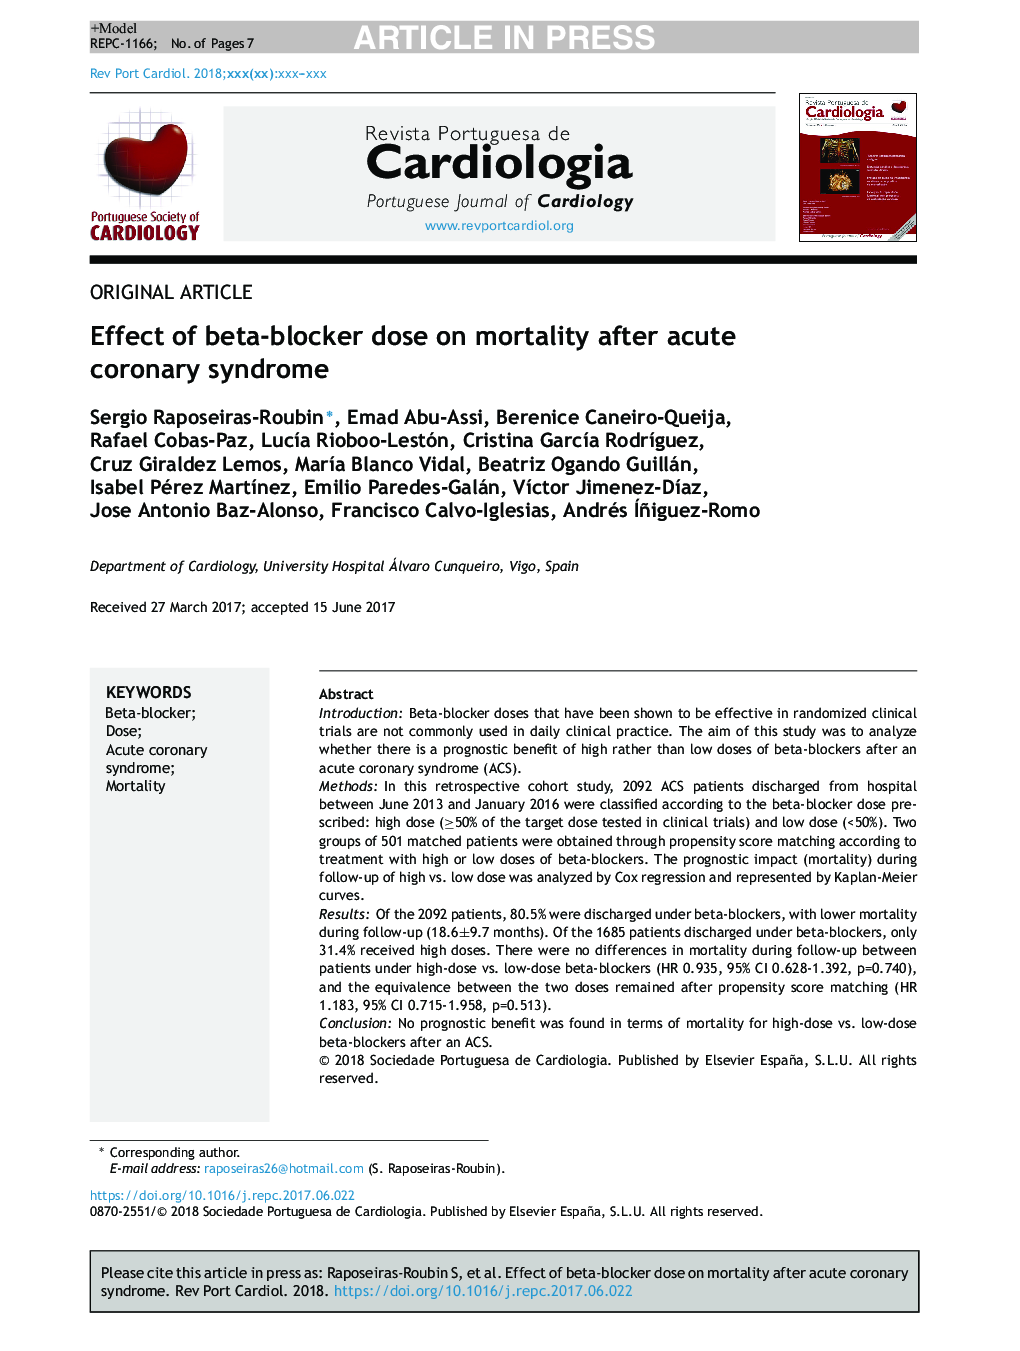 Effect of beta-blocker dose on mortality after acute coronary syndrome